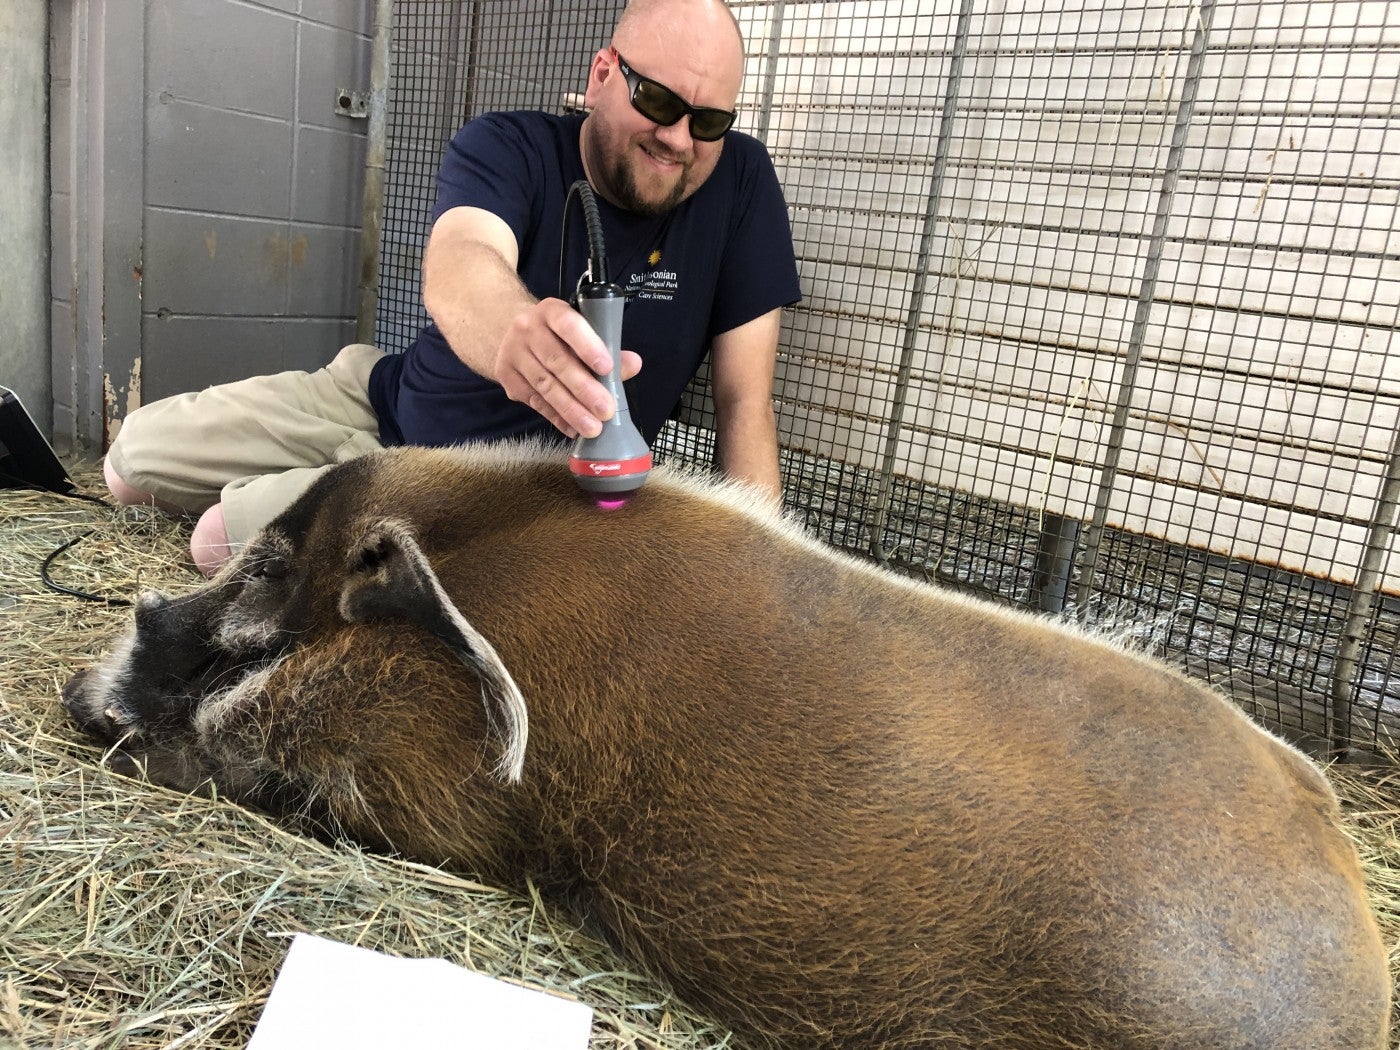 David Olsen administers photobiomodulation therapy treatment to Roscoe, a geriatric red river hog who formerly lived at the Africa Trail exhibit. 